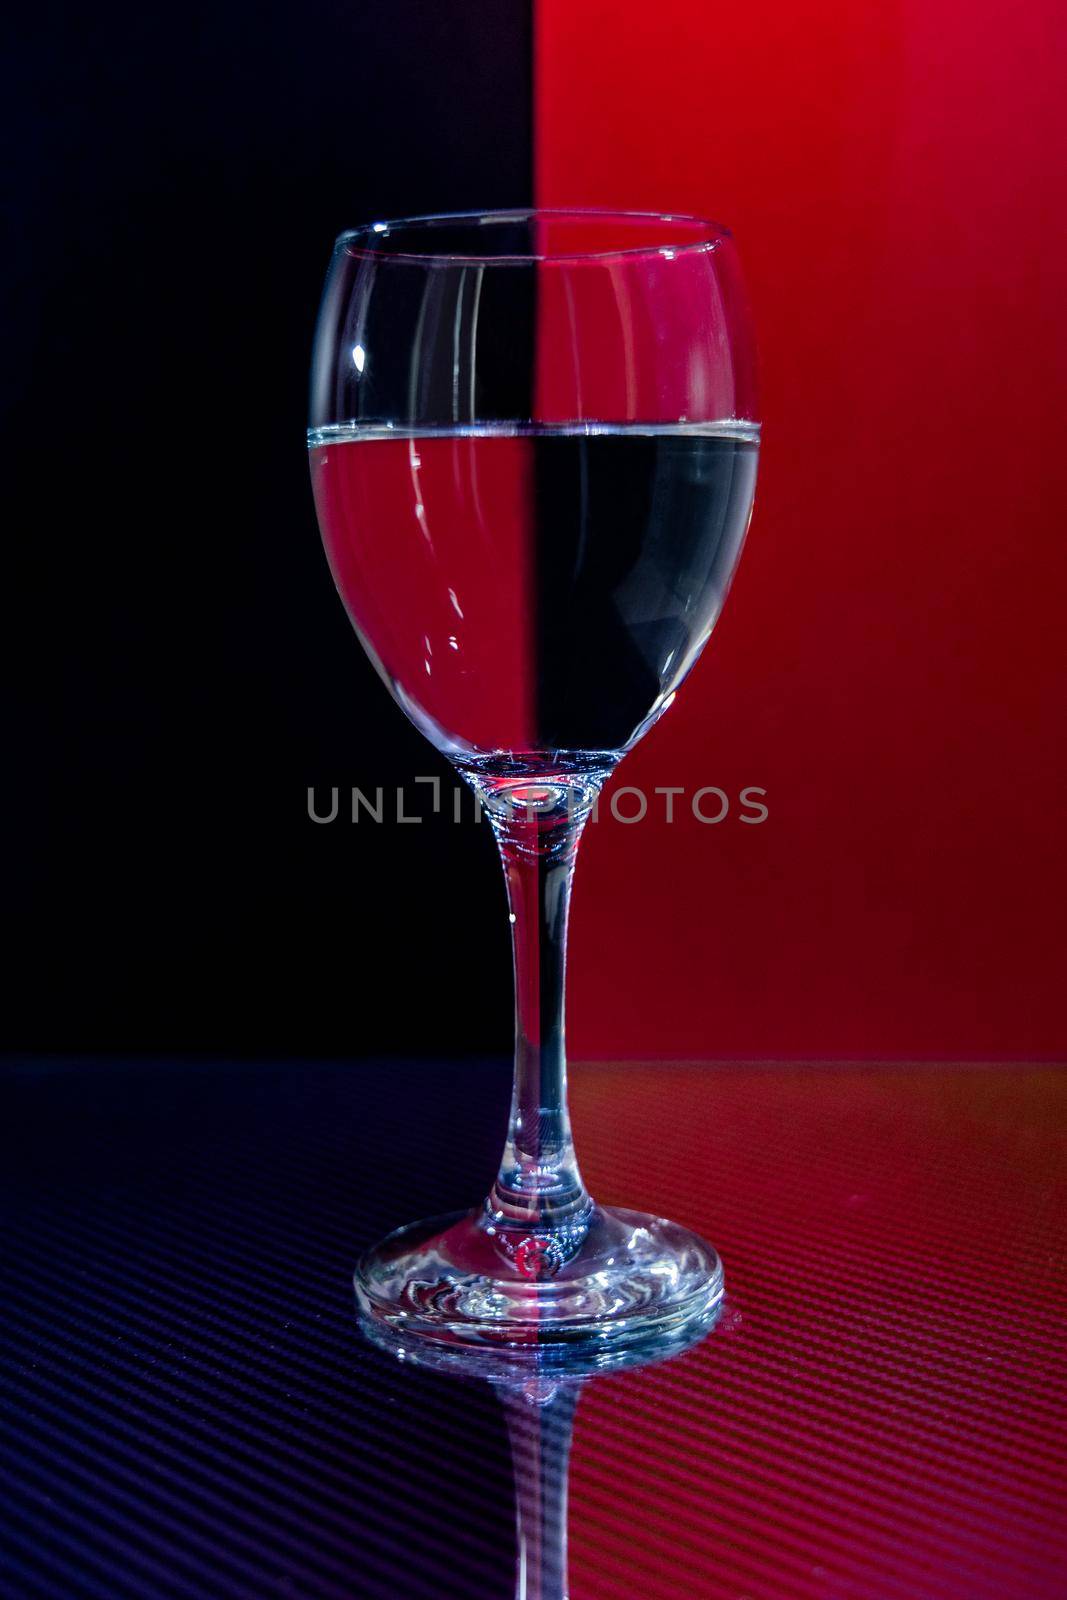 Small glassy goblet with water standing on glassy carbon reflecting surface with reflecting red and black background